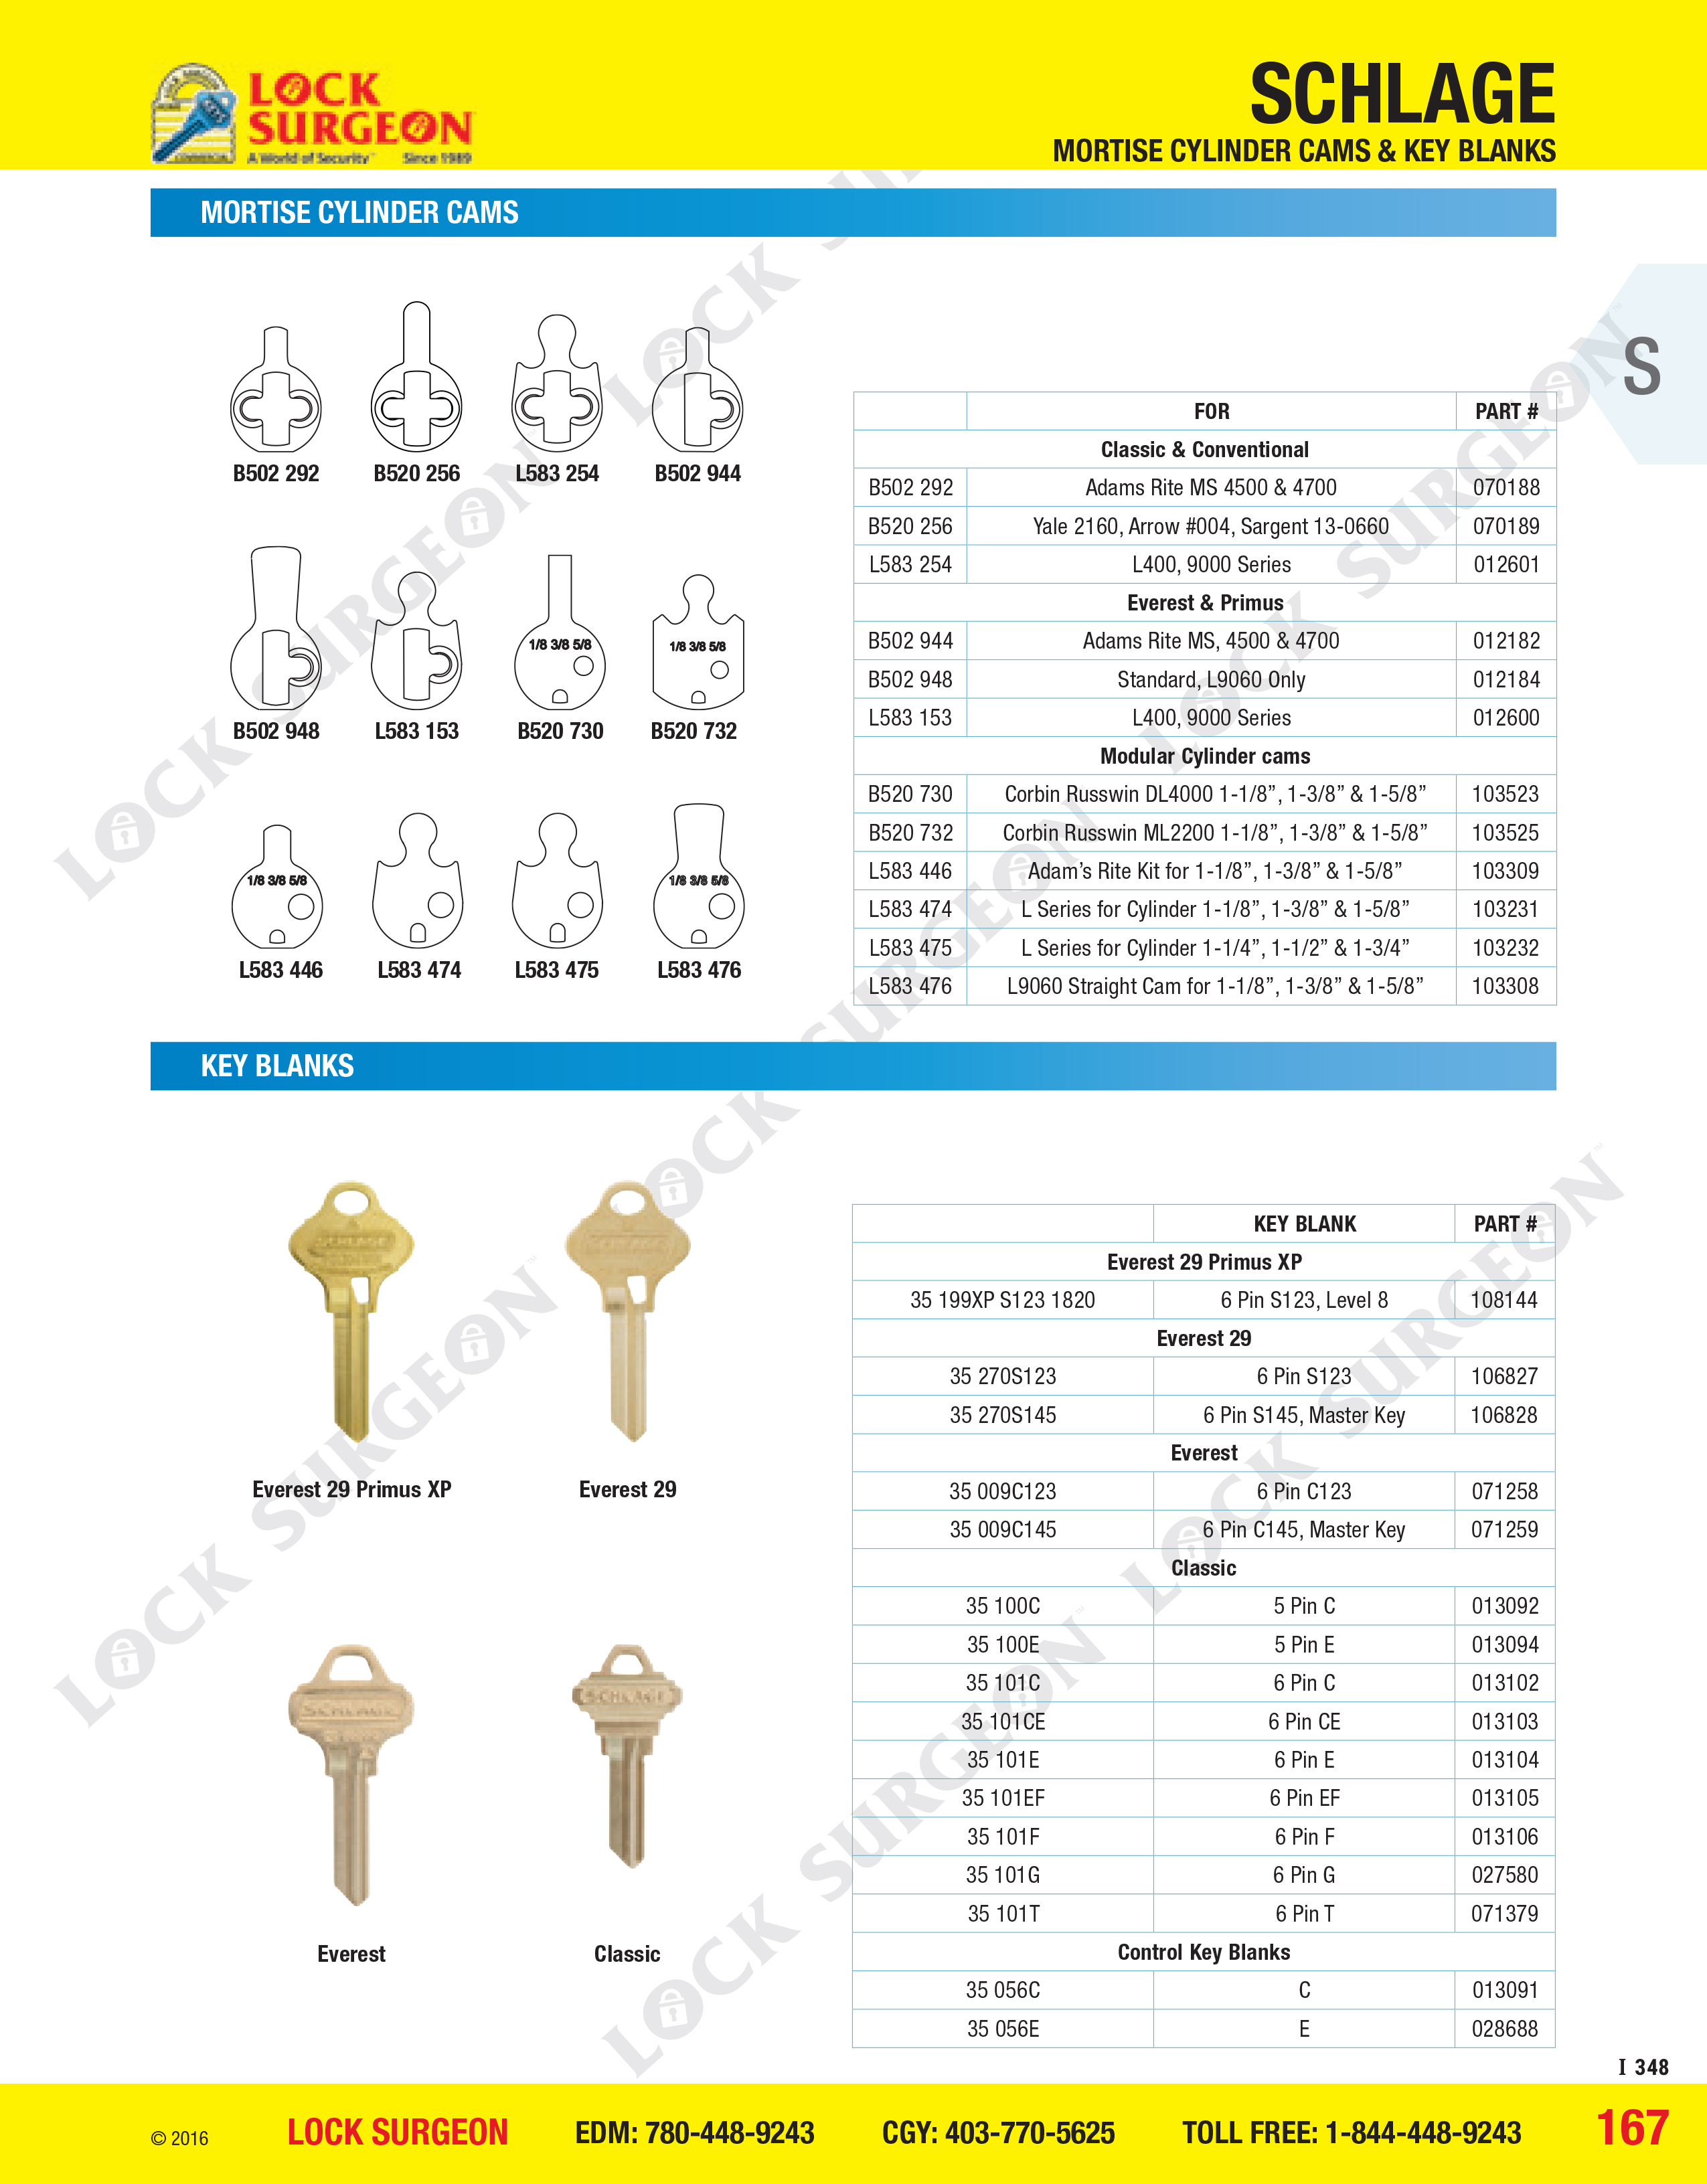 Acheson Schlage mortise cylinder cams and key blanks.